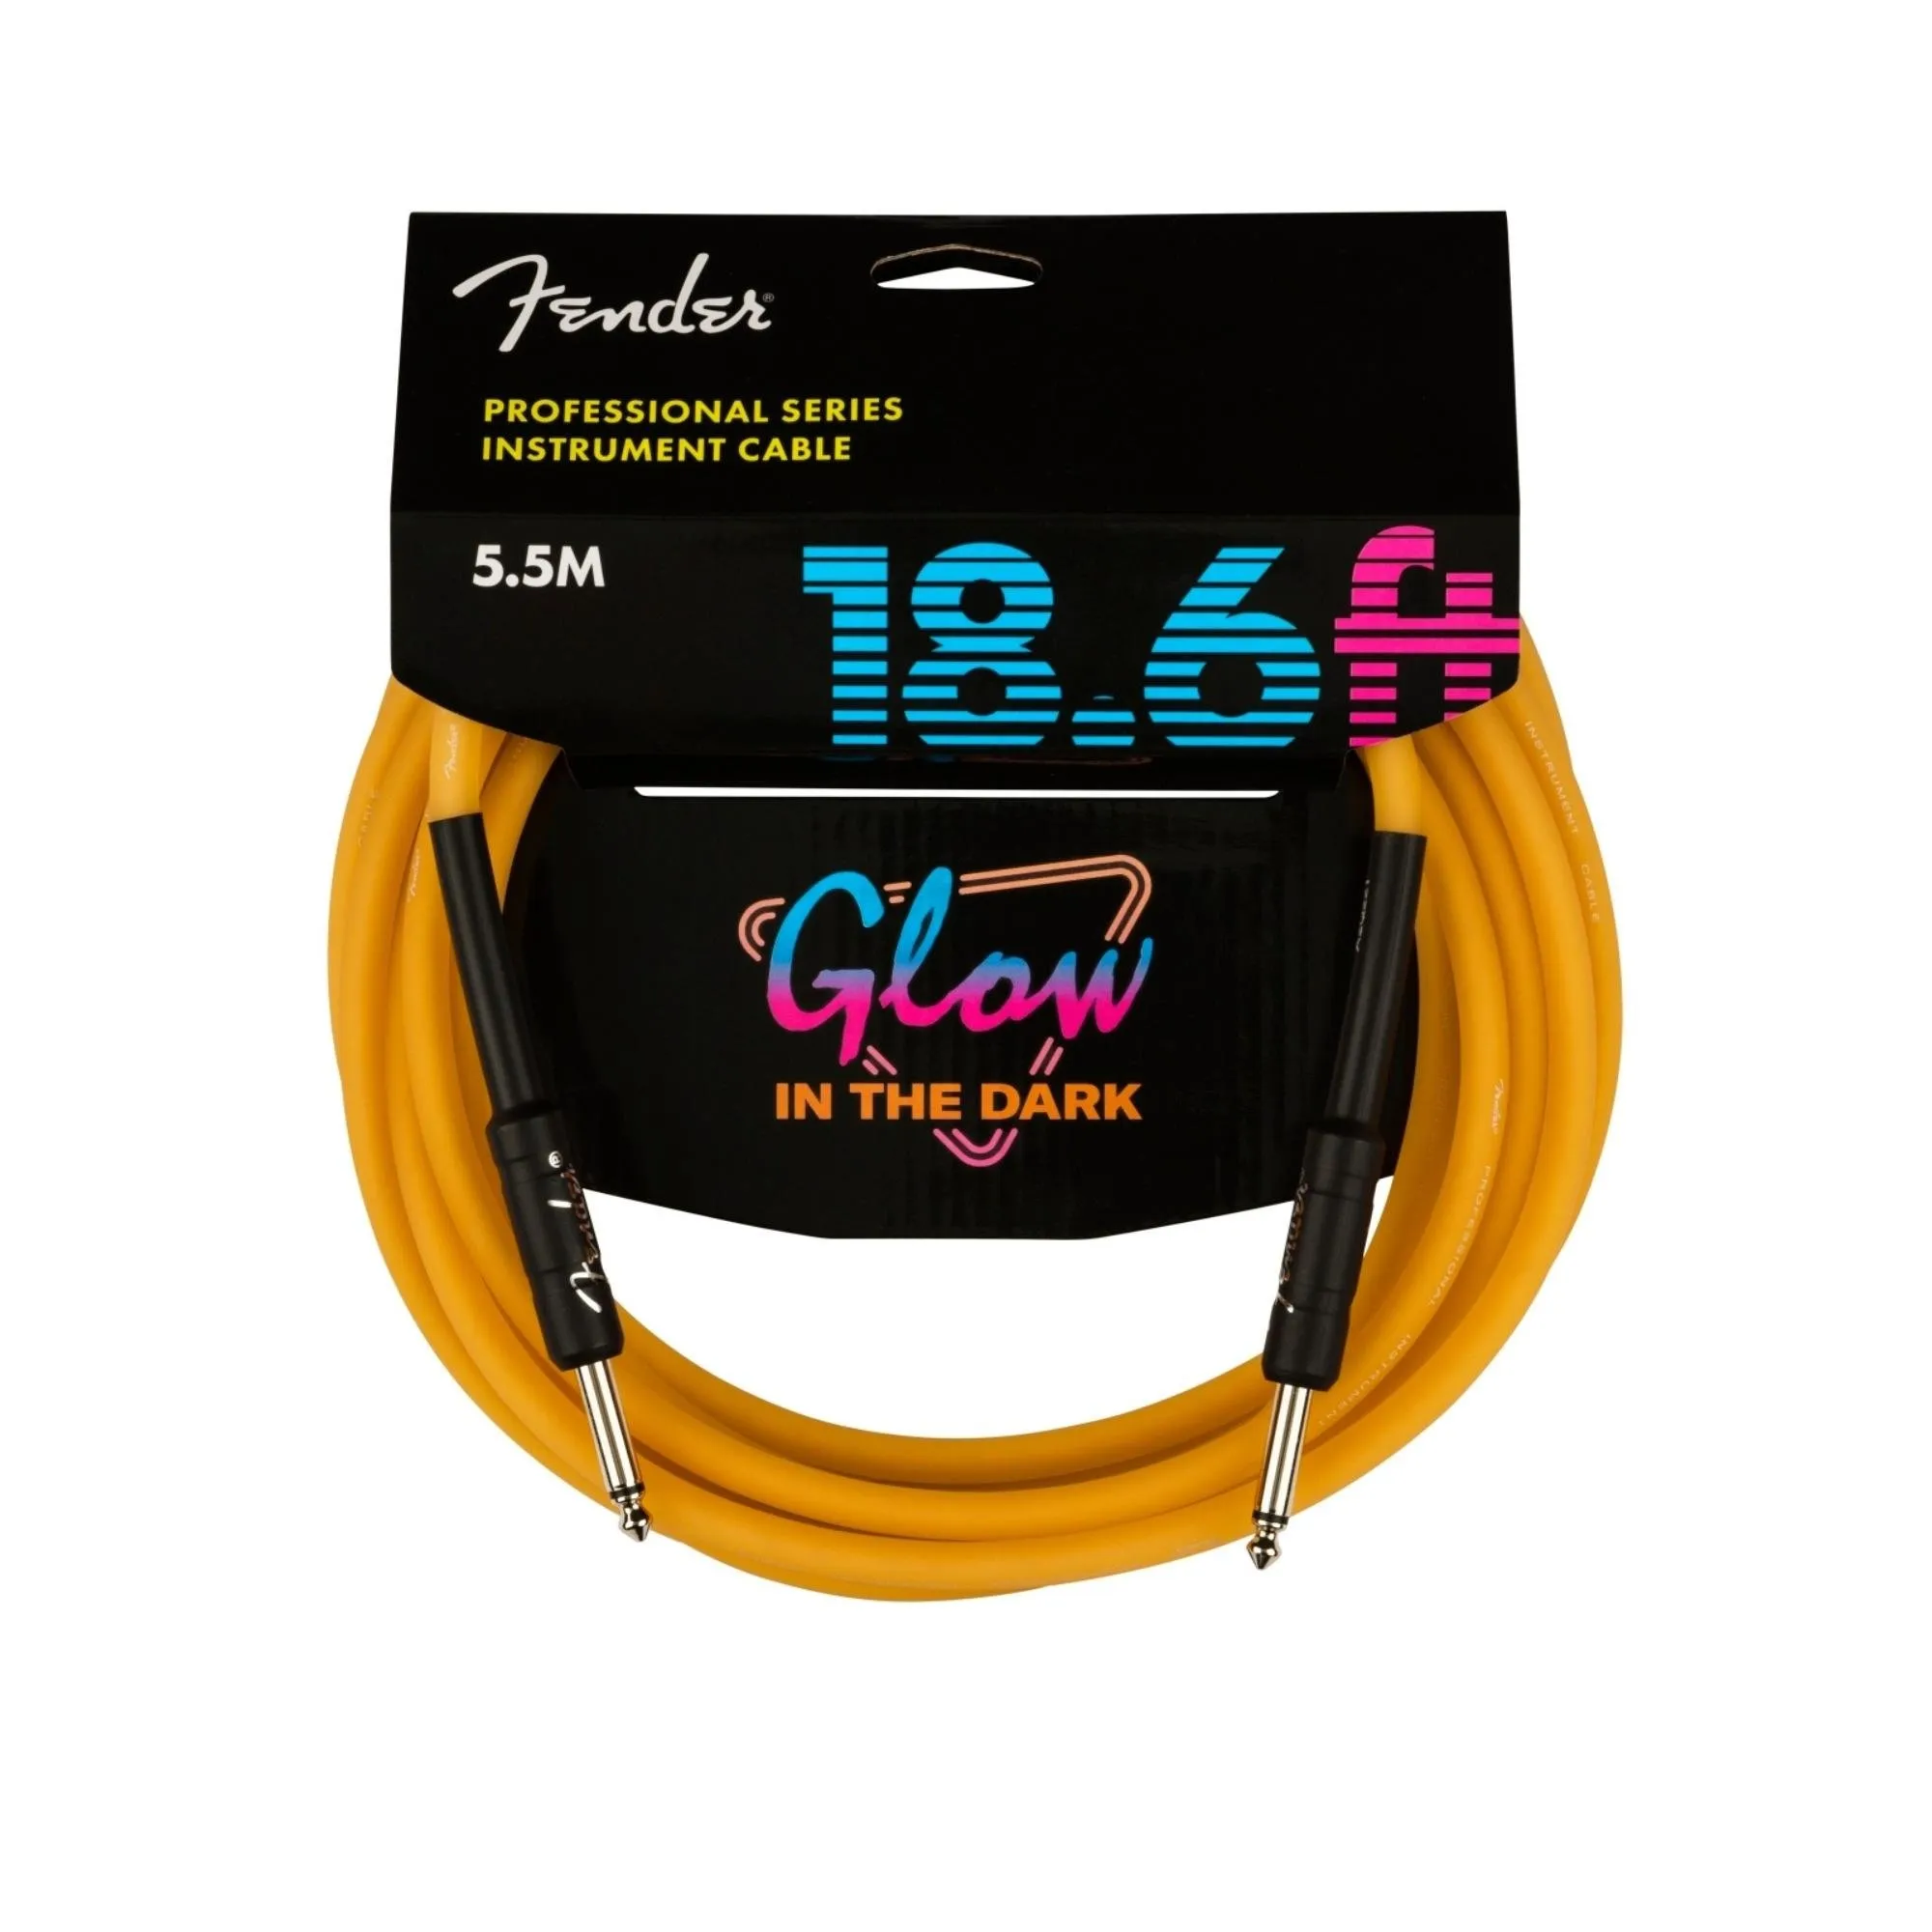 Cabo Fender para Instrumentos 5,5M P10 Professional Series Glow In The (82508)